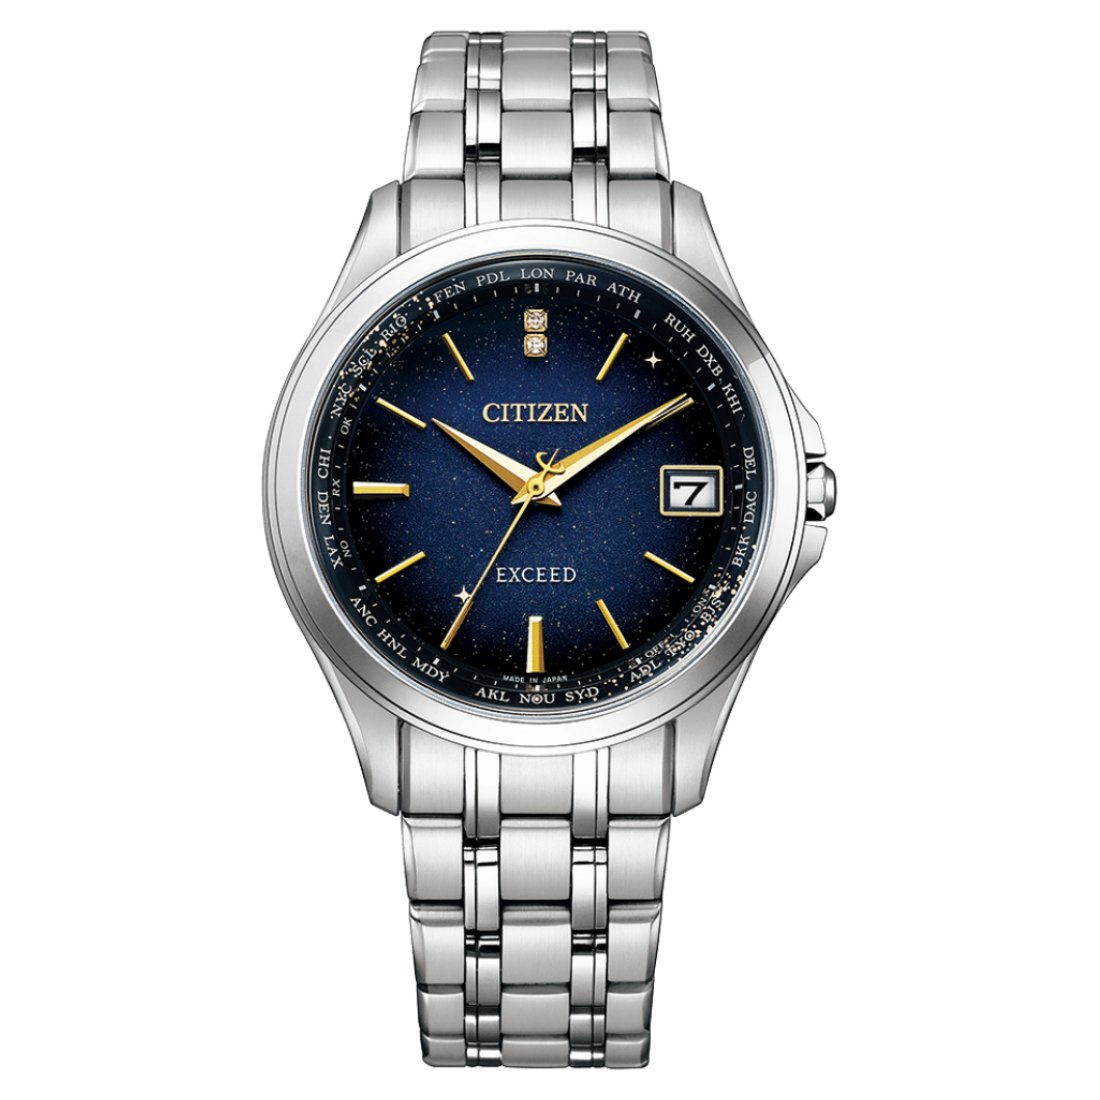 Citizen CB1080-61L Exceed Milky Way Limited Model Midnight Blue Dial Watch -citizen